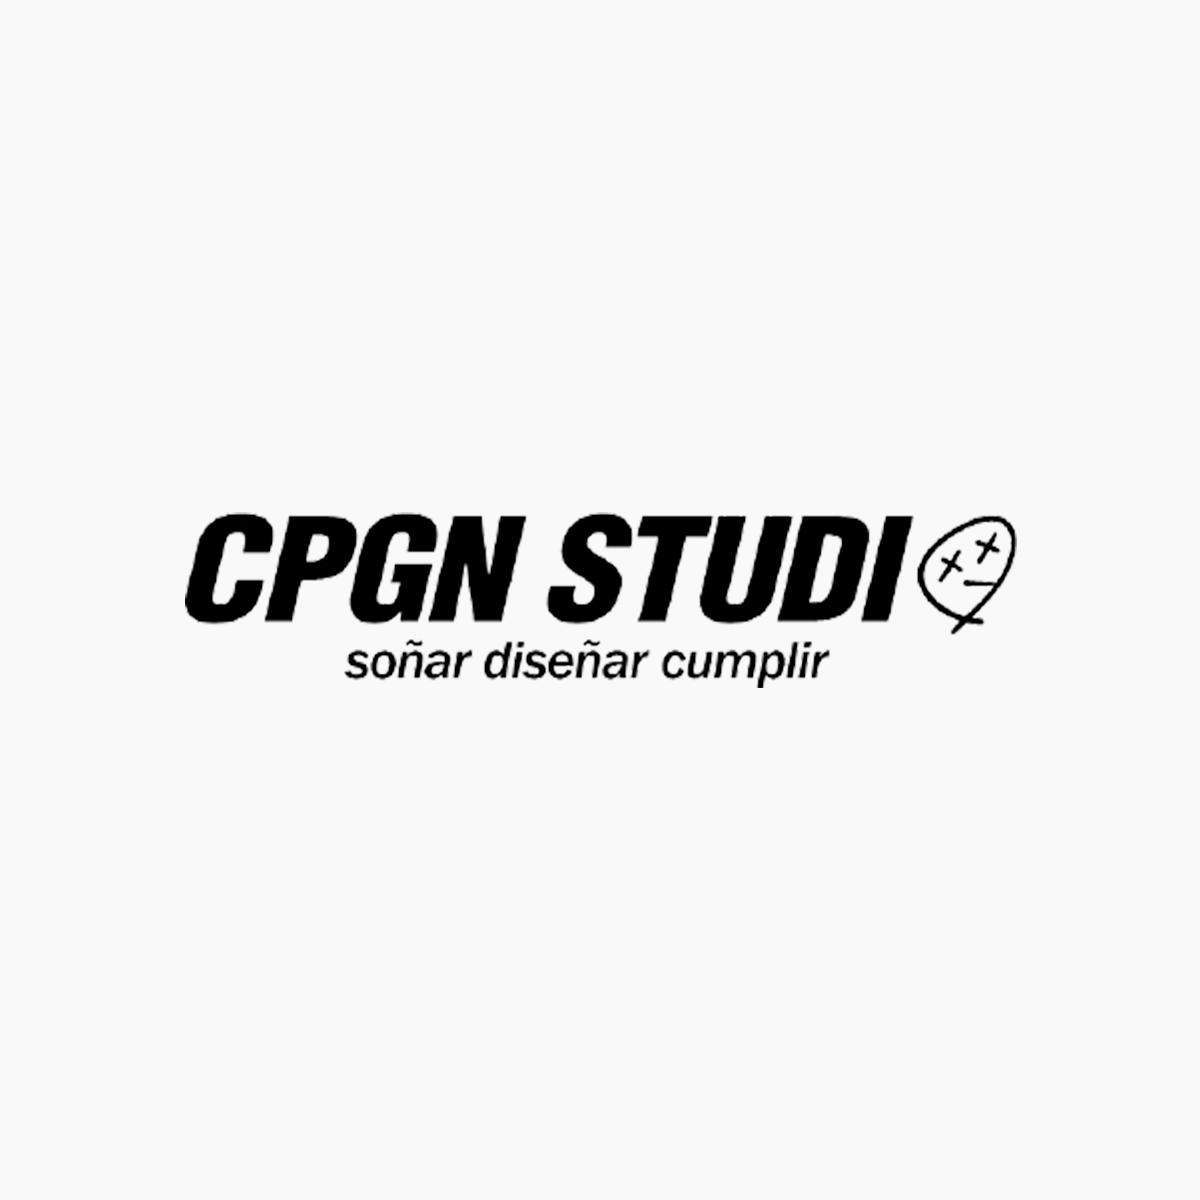 CPGN